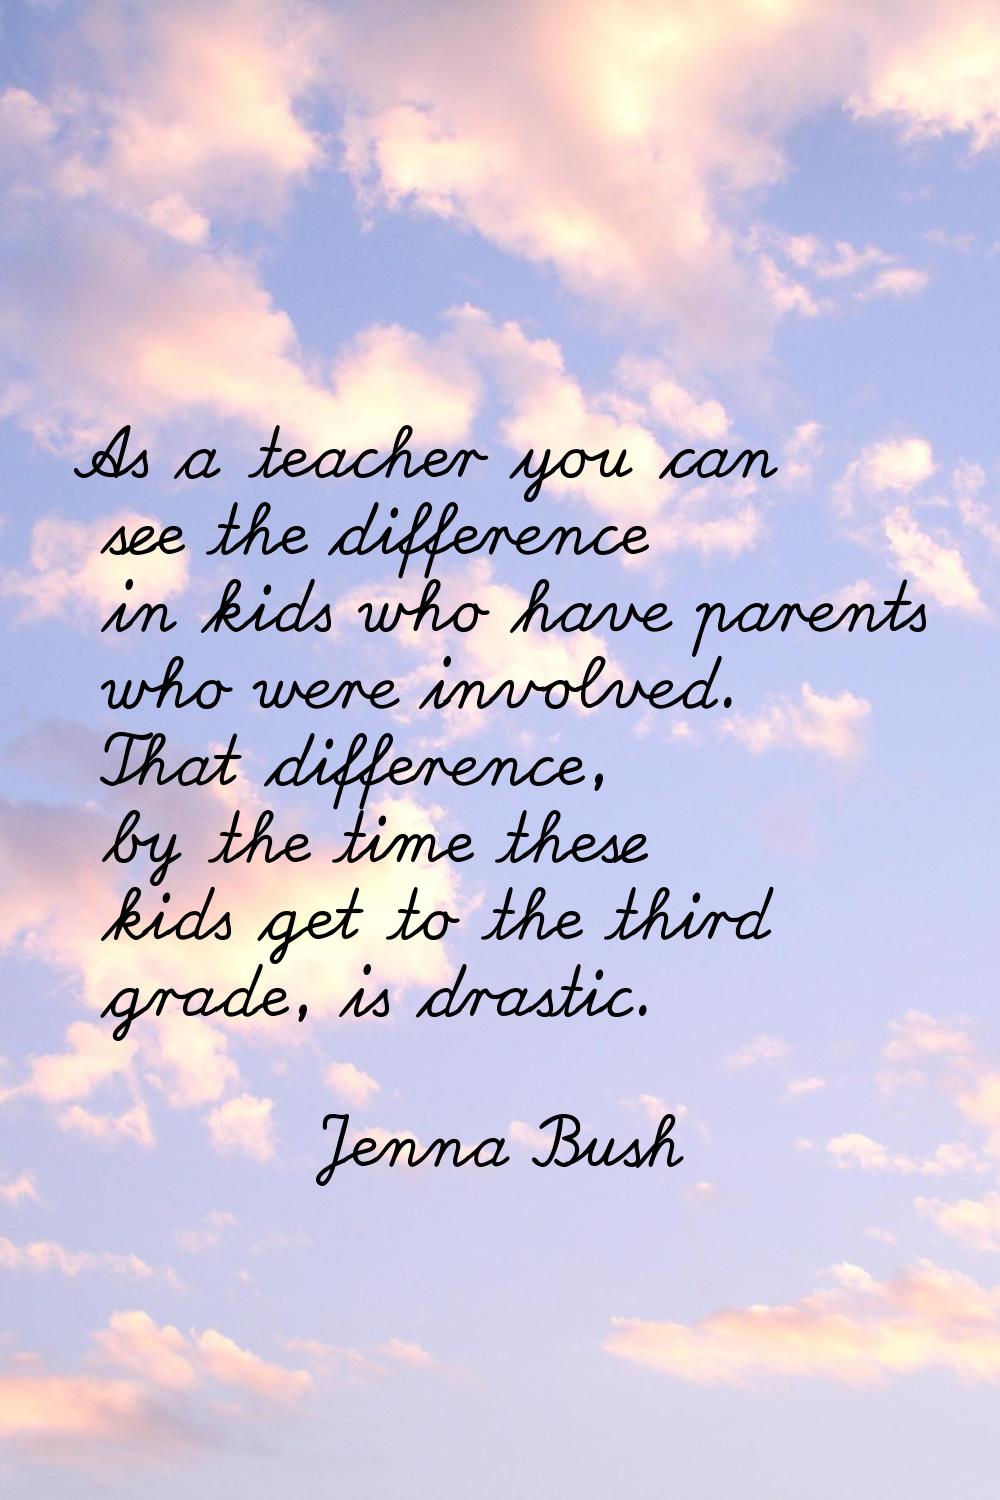 As a teacher you can see the difference in kids who have parents who were involved. That difference